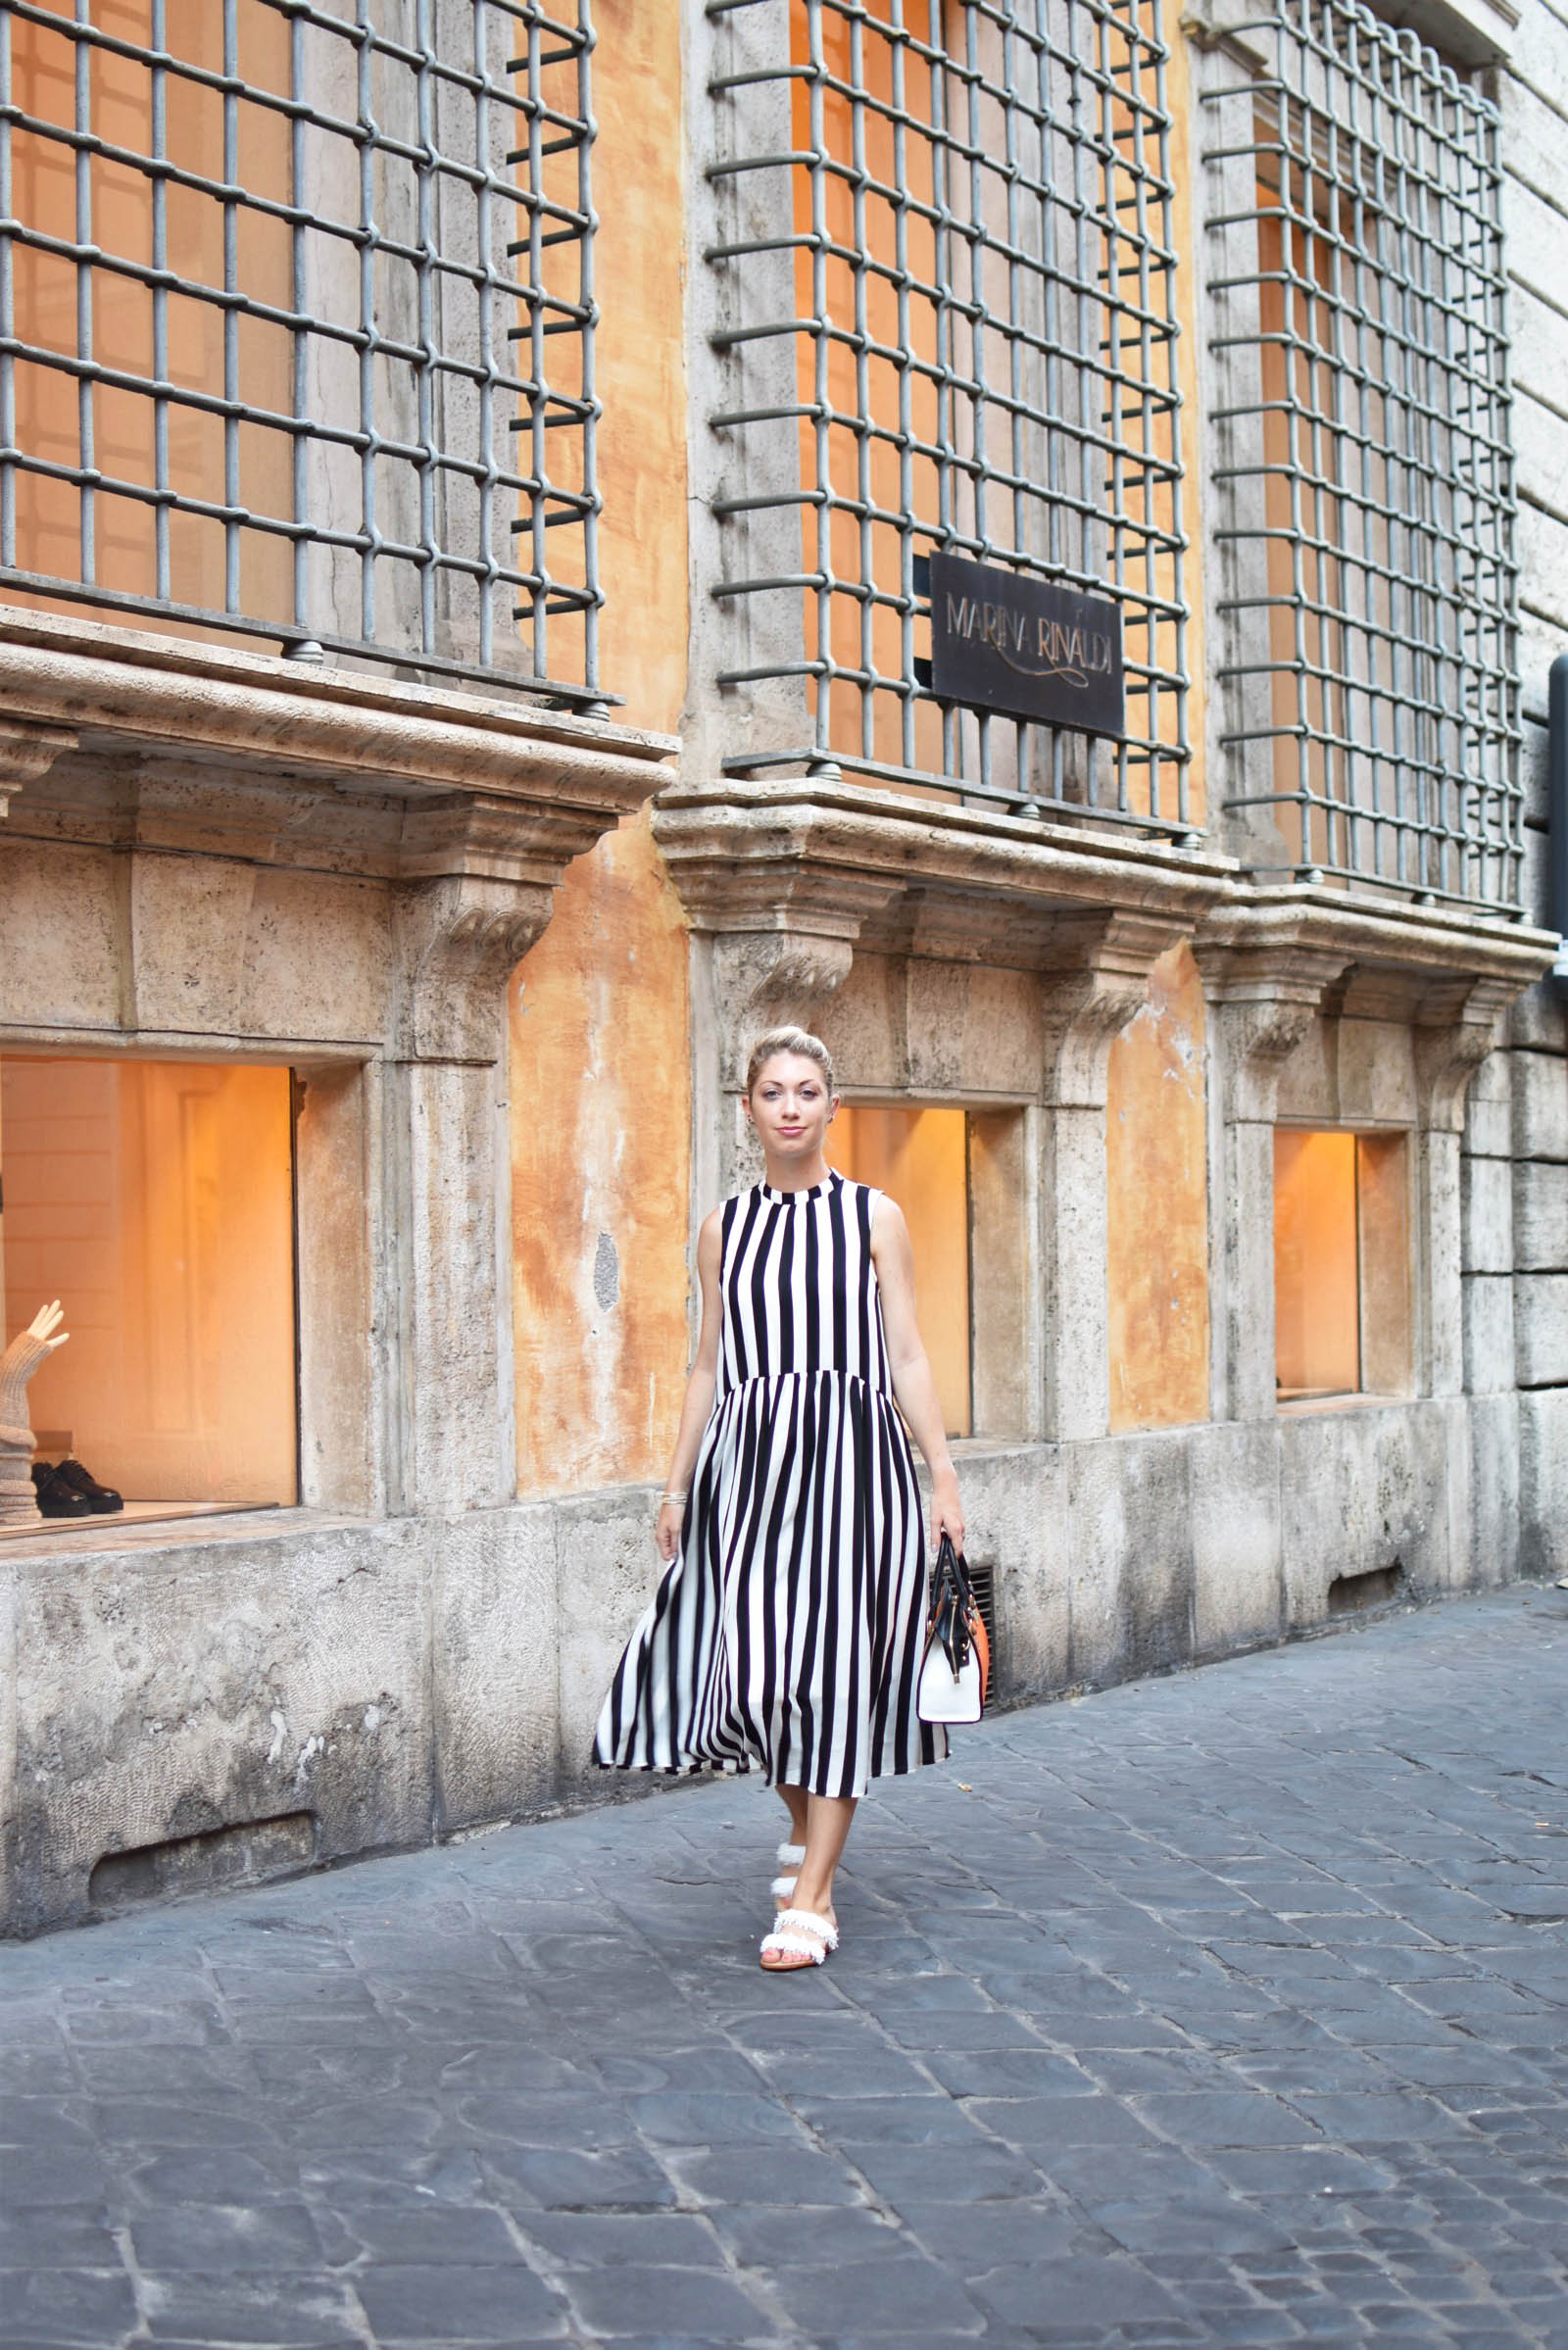 black and white striped dress and orange italian leather bag in Rome